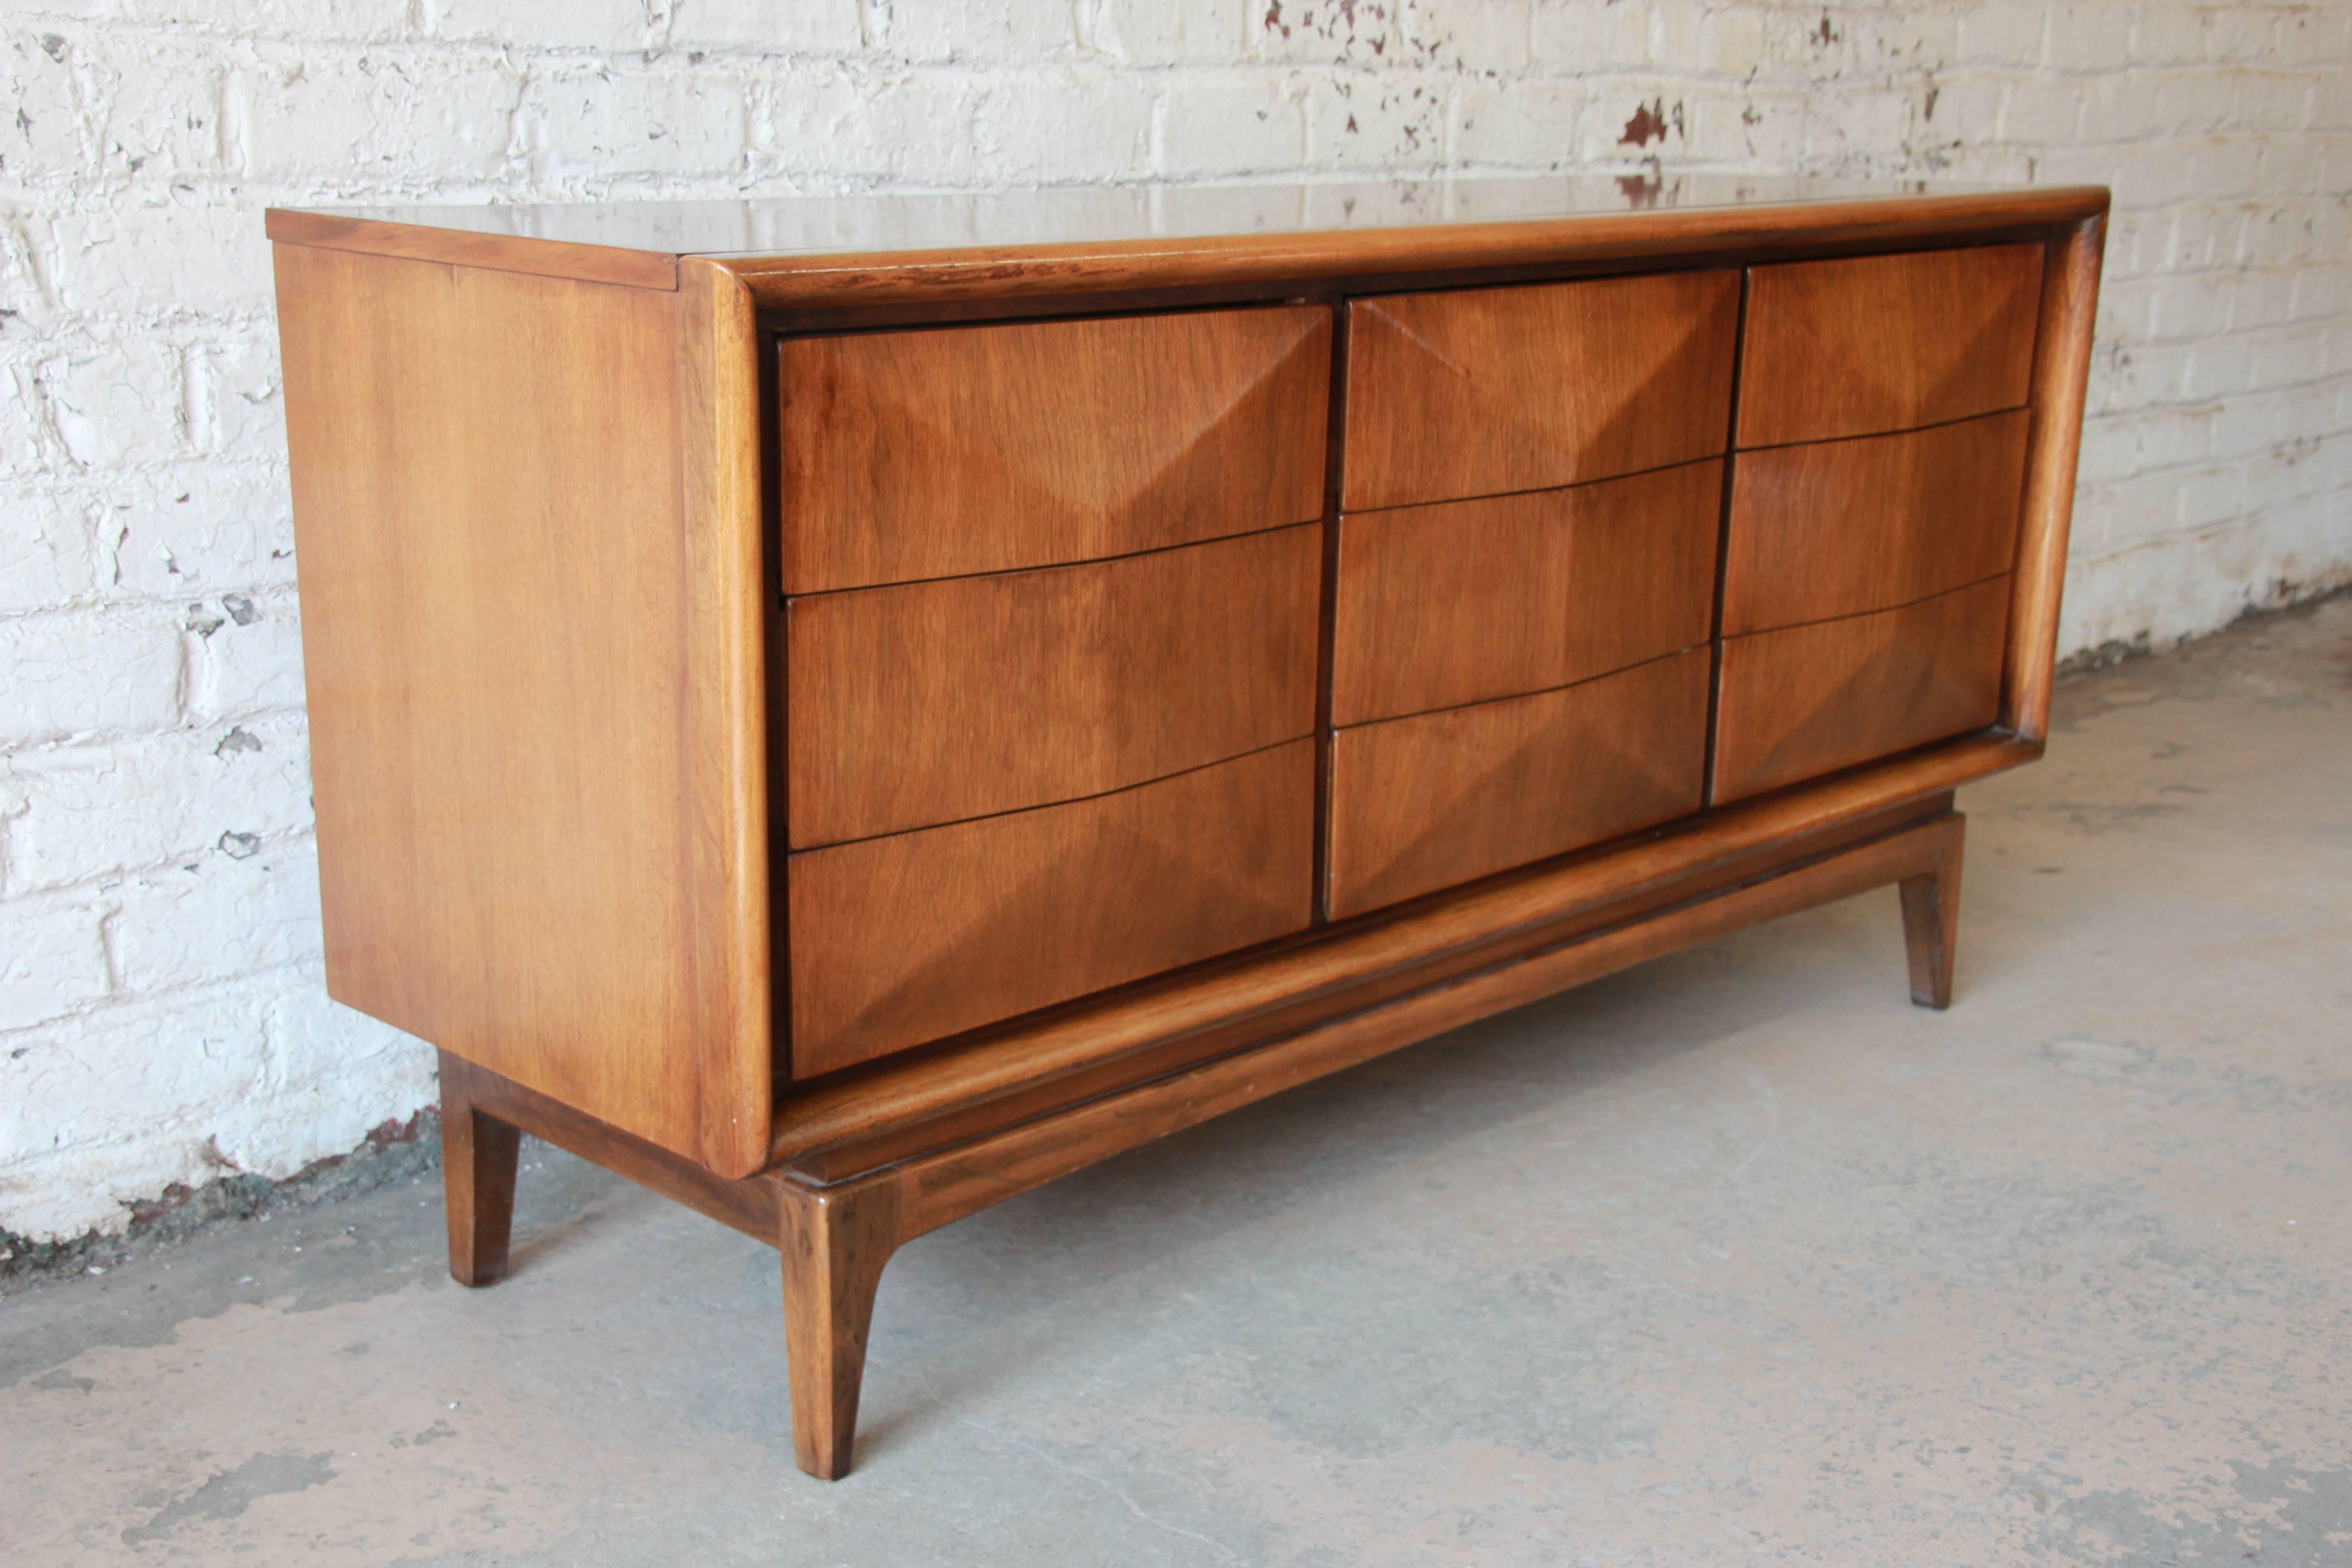 Mid-20th Century Walnut Diamond Front Long Dresser or Credenza by United